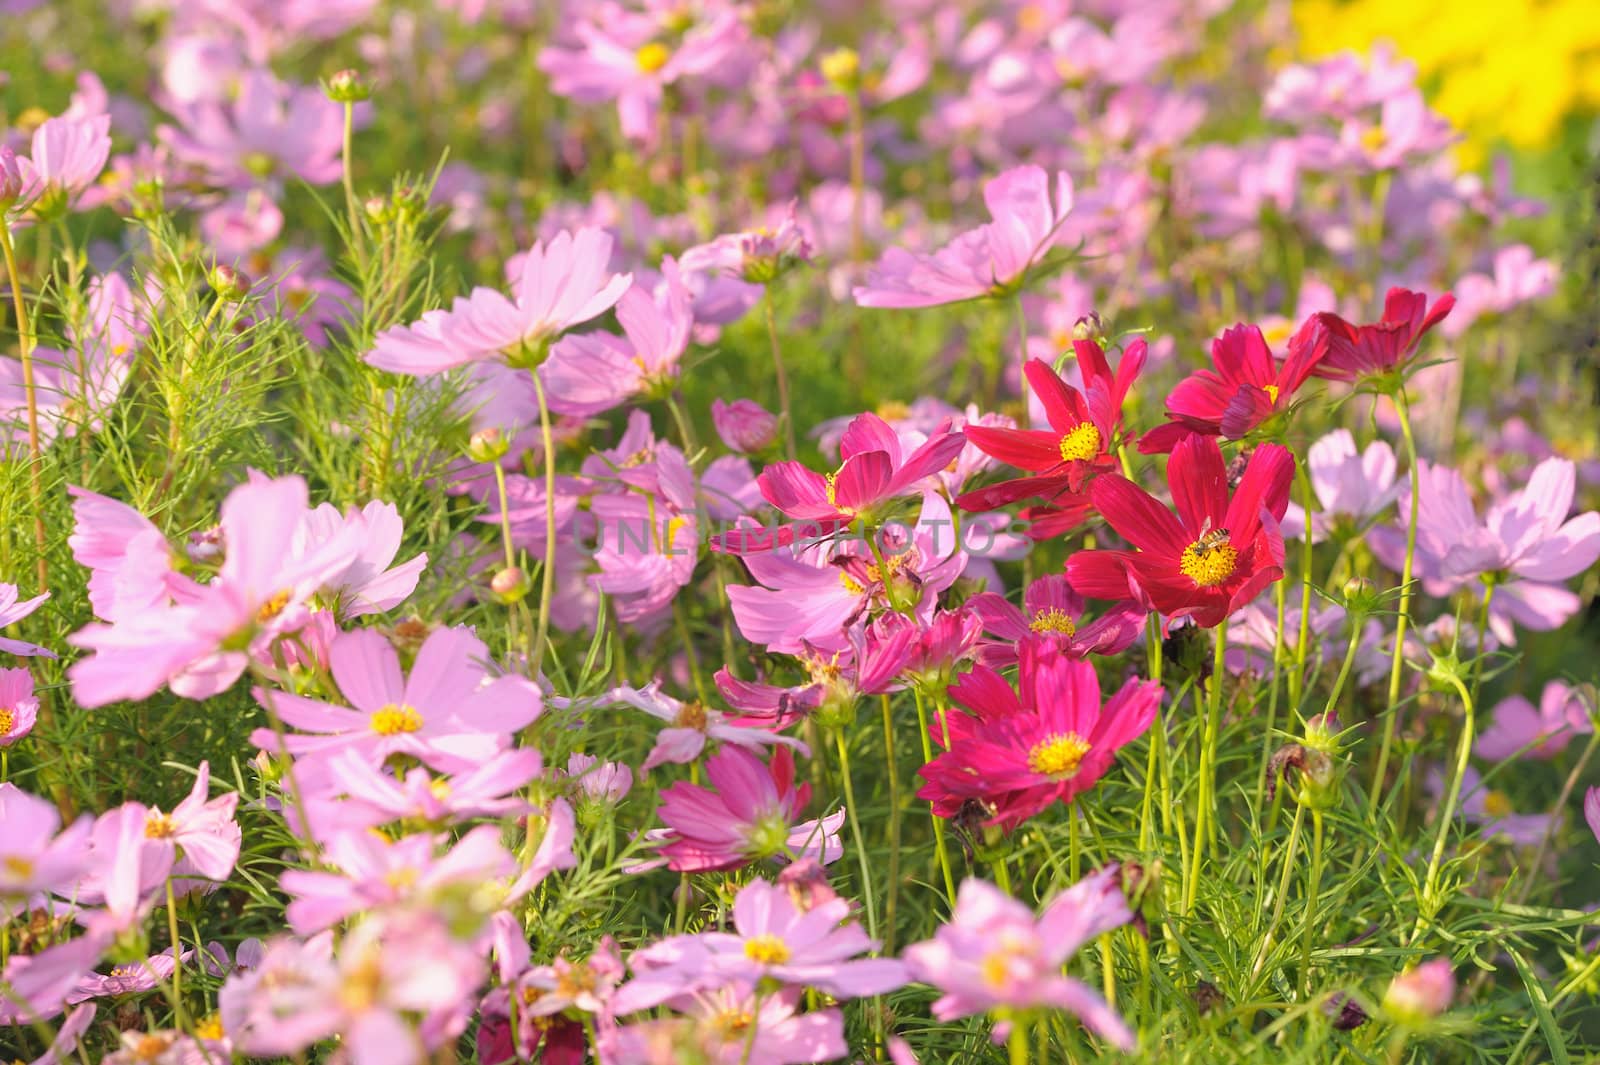 Field of colorful flowers in the garden. by ngungfoto